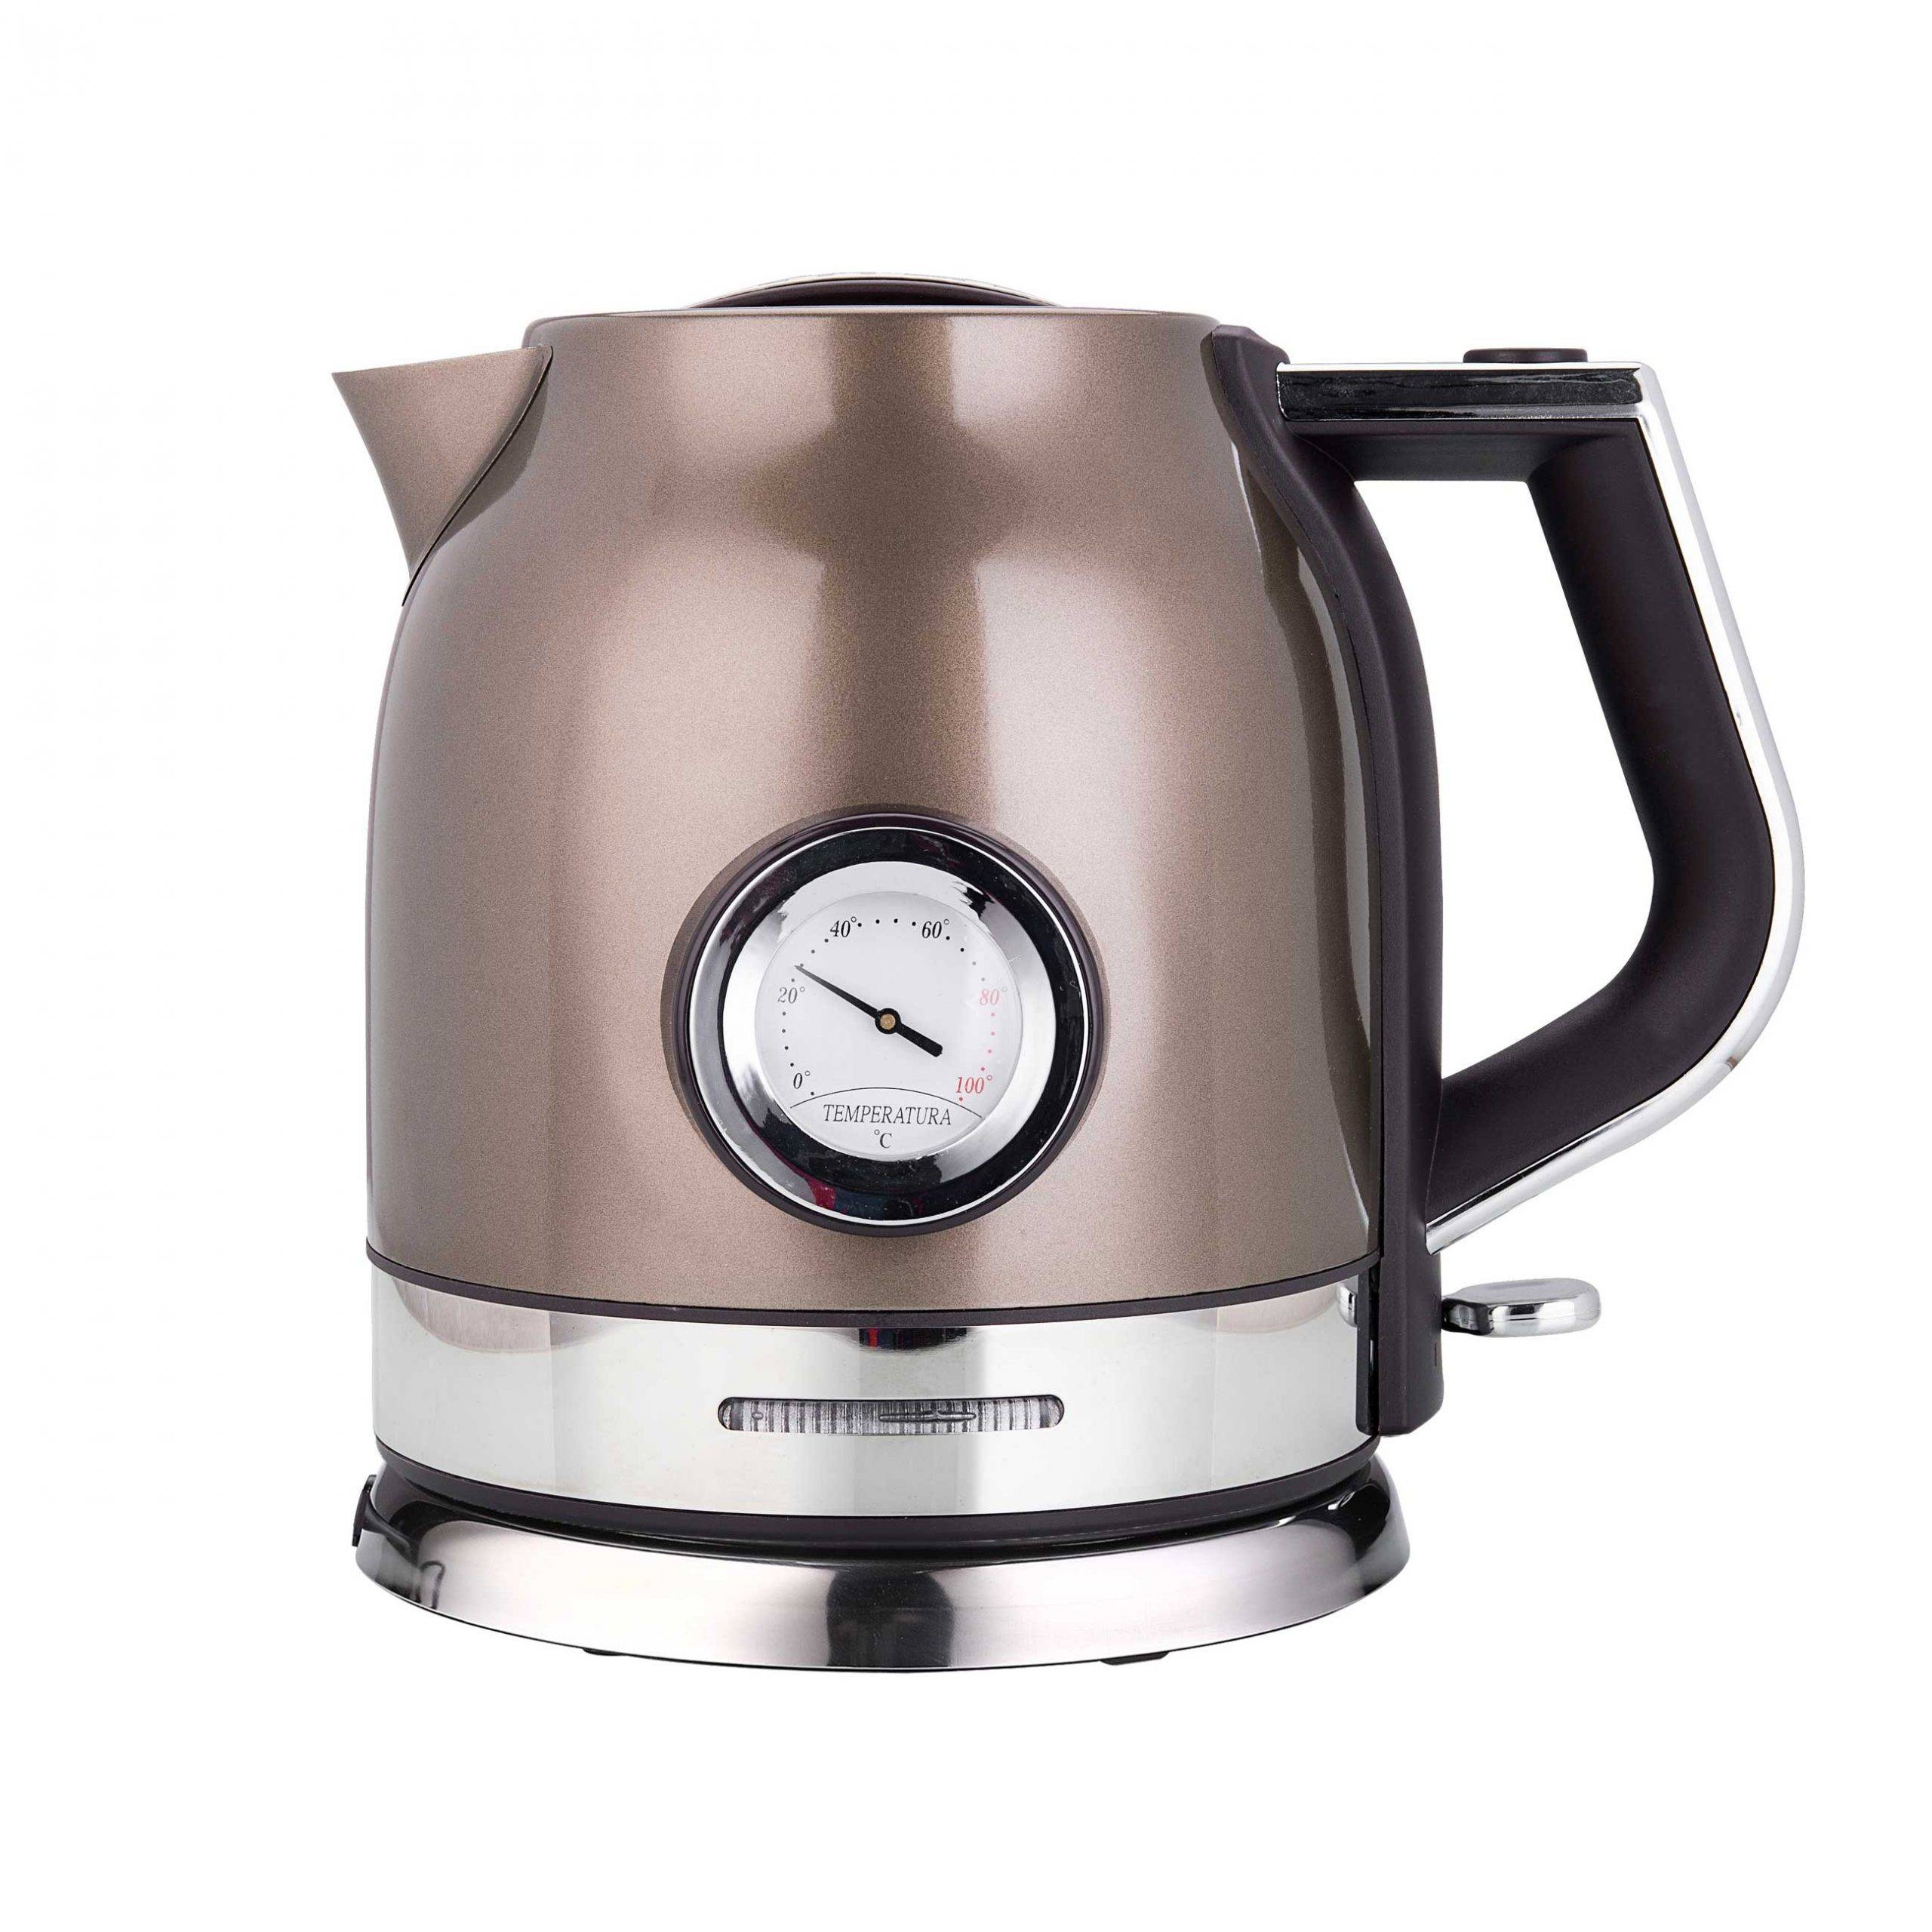 Colorful Electric Kettle with Thermometer Kitchen Accessories Tools & Gadgets cb5feb1b7314637725a2e7: Black|Brown|Pink|Red